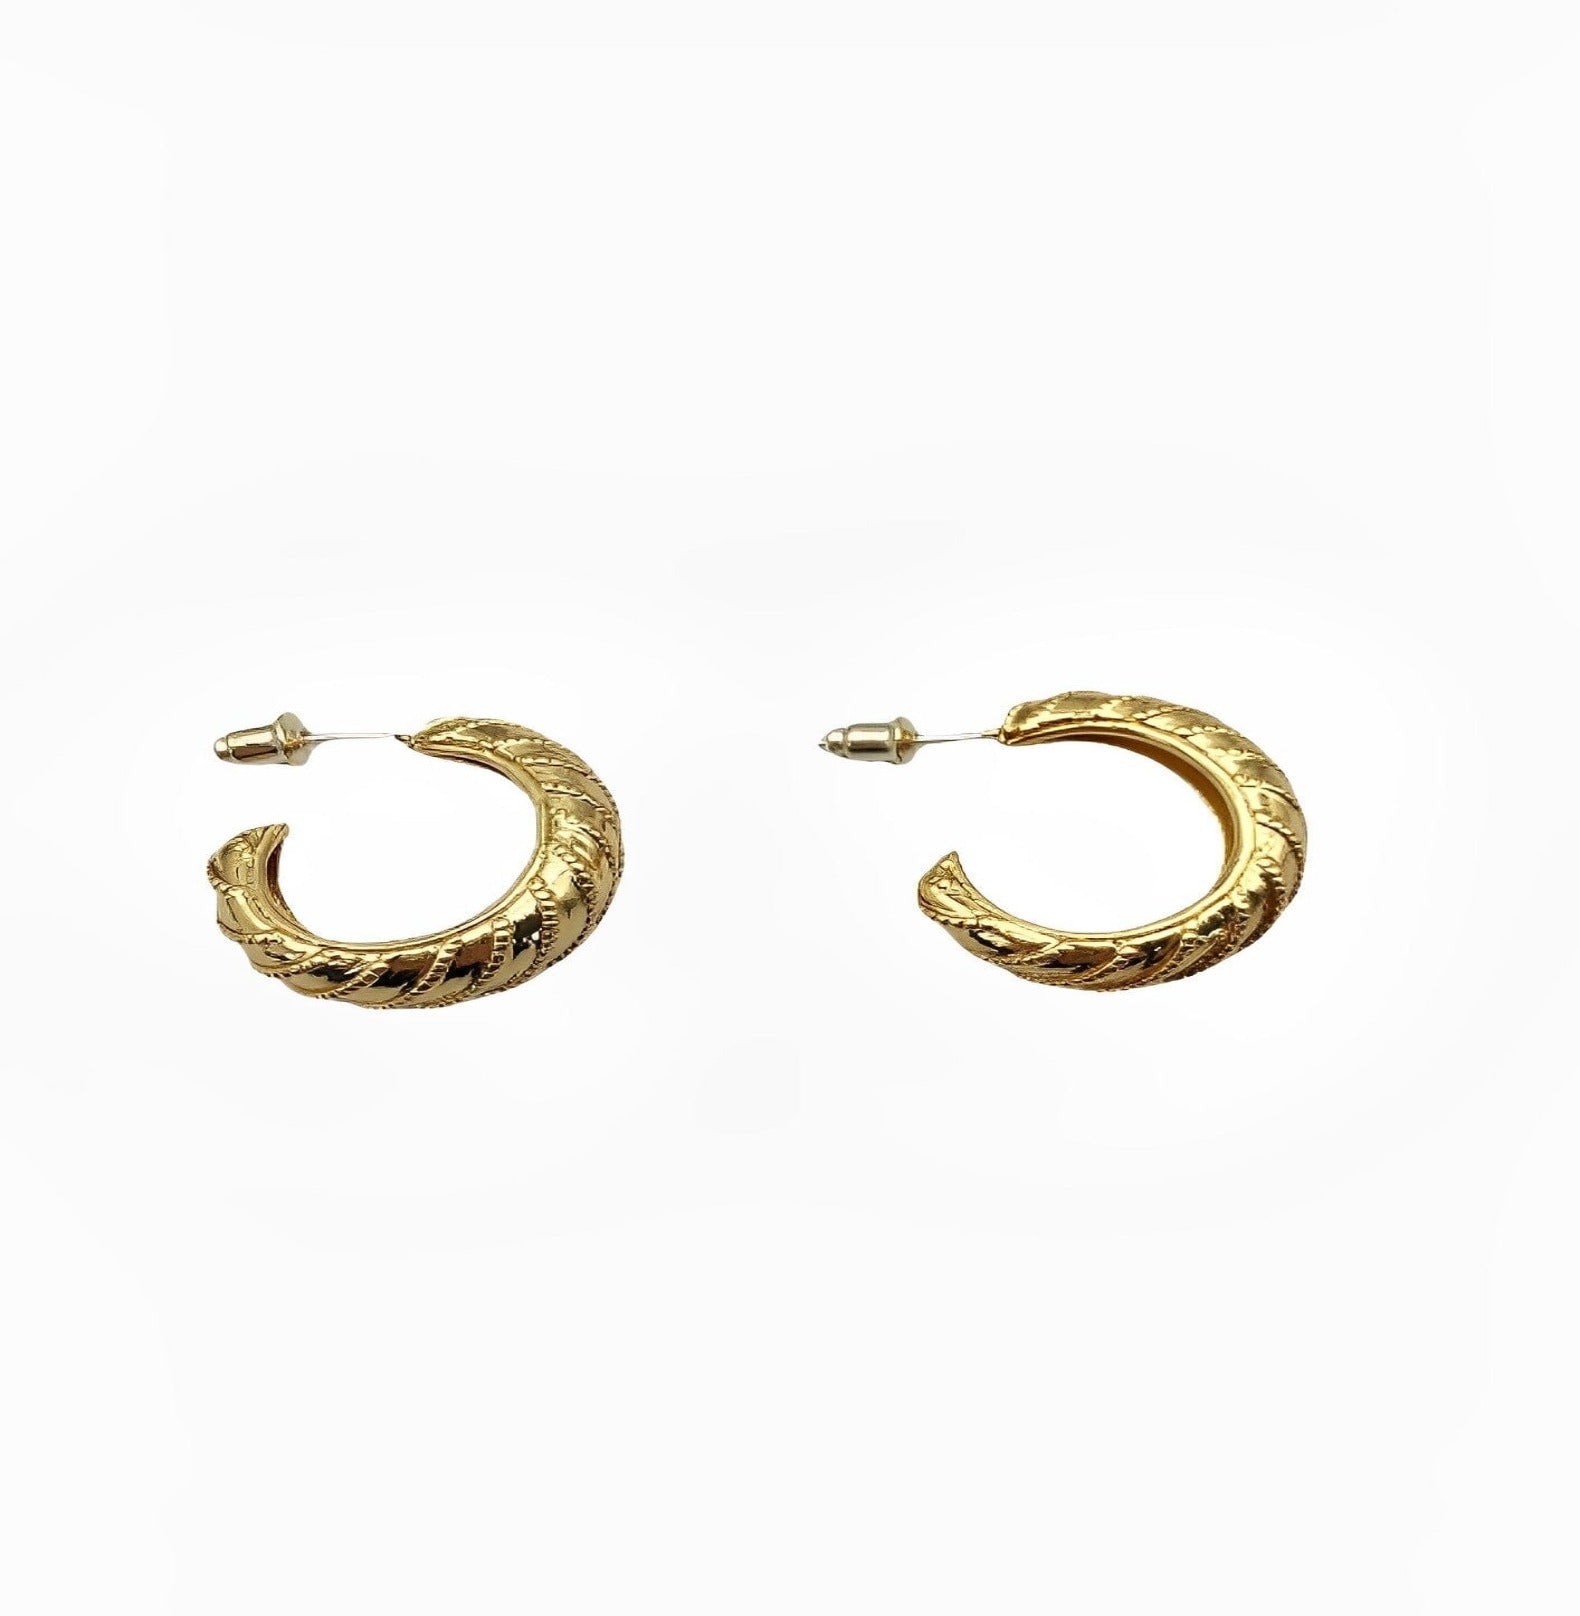 ANNE EARRINGS earing Yubama Jewelry Online Store - The Elegant Designs of Gold and Silver ! 